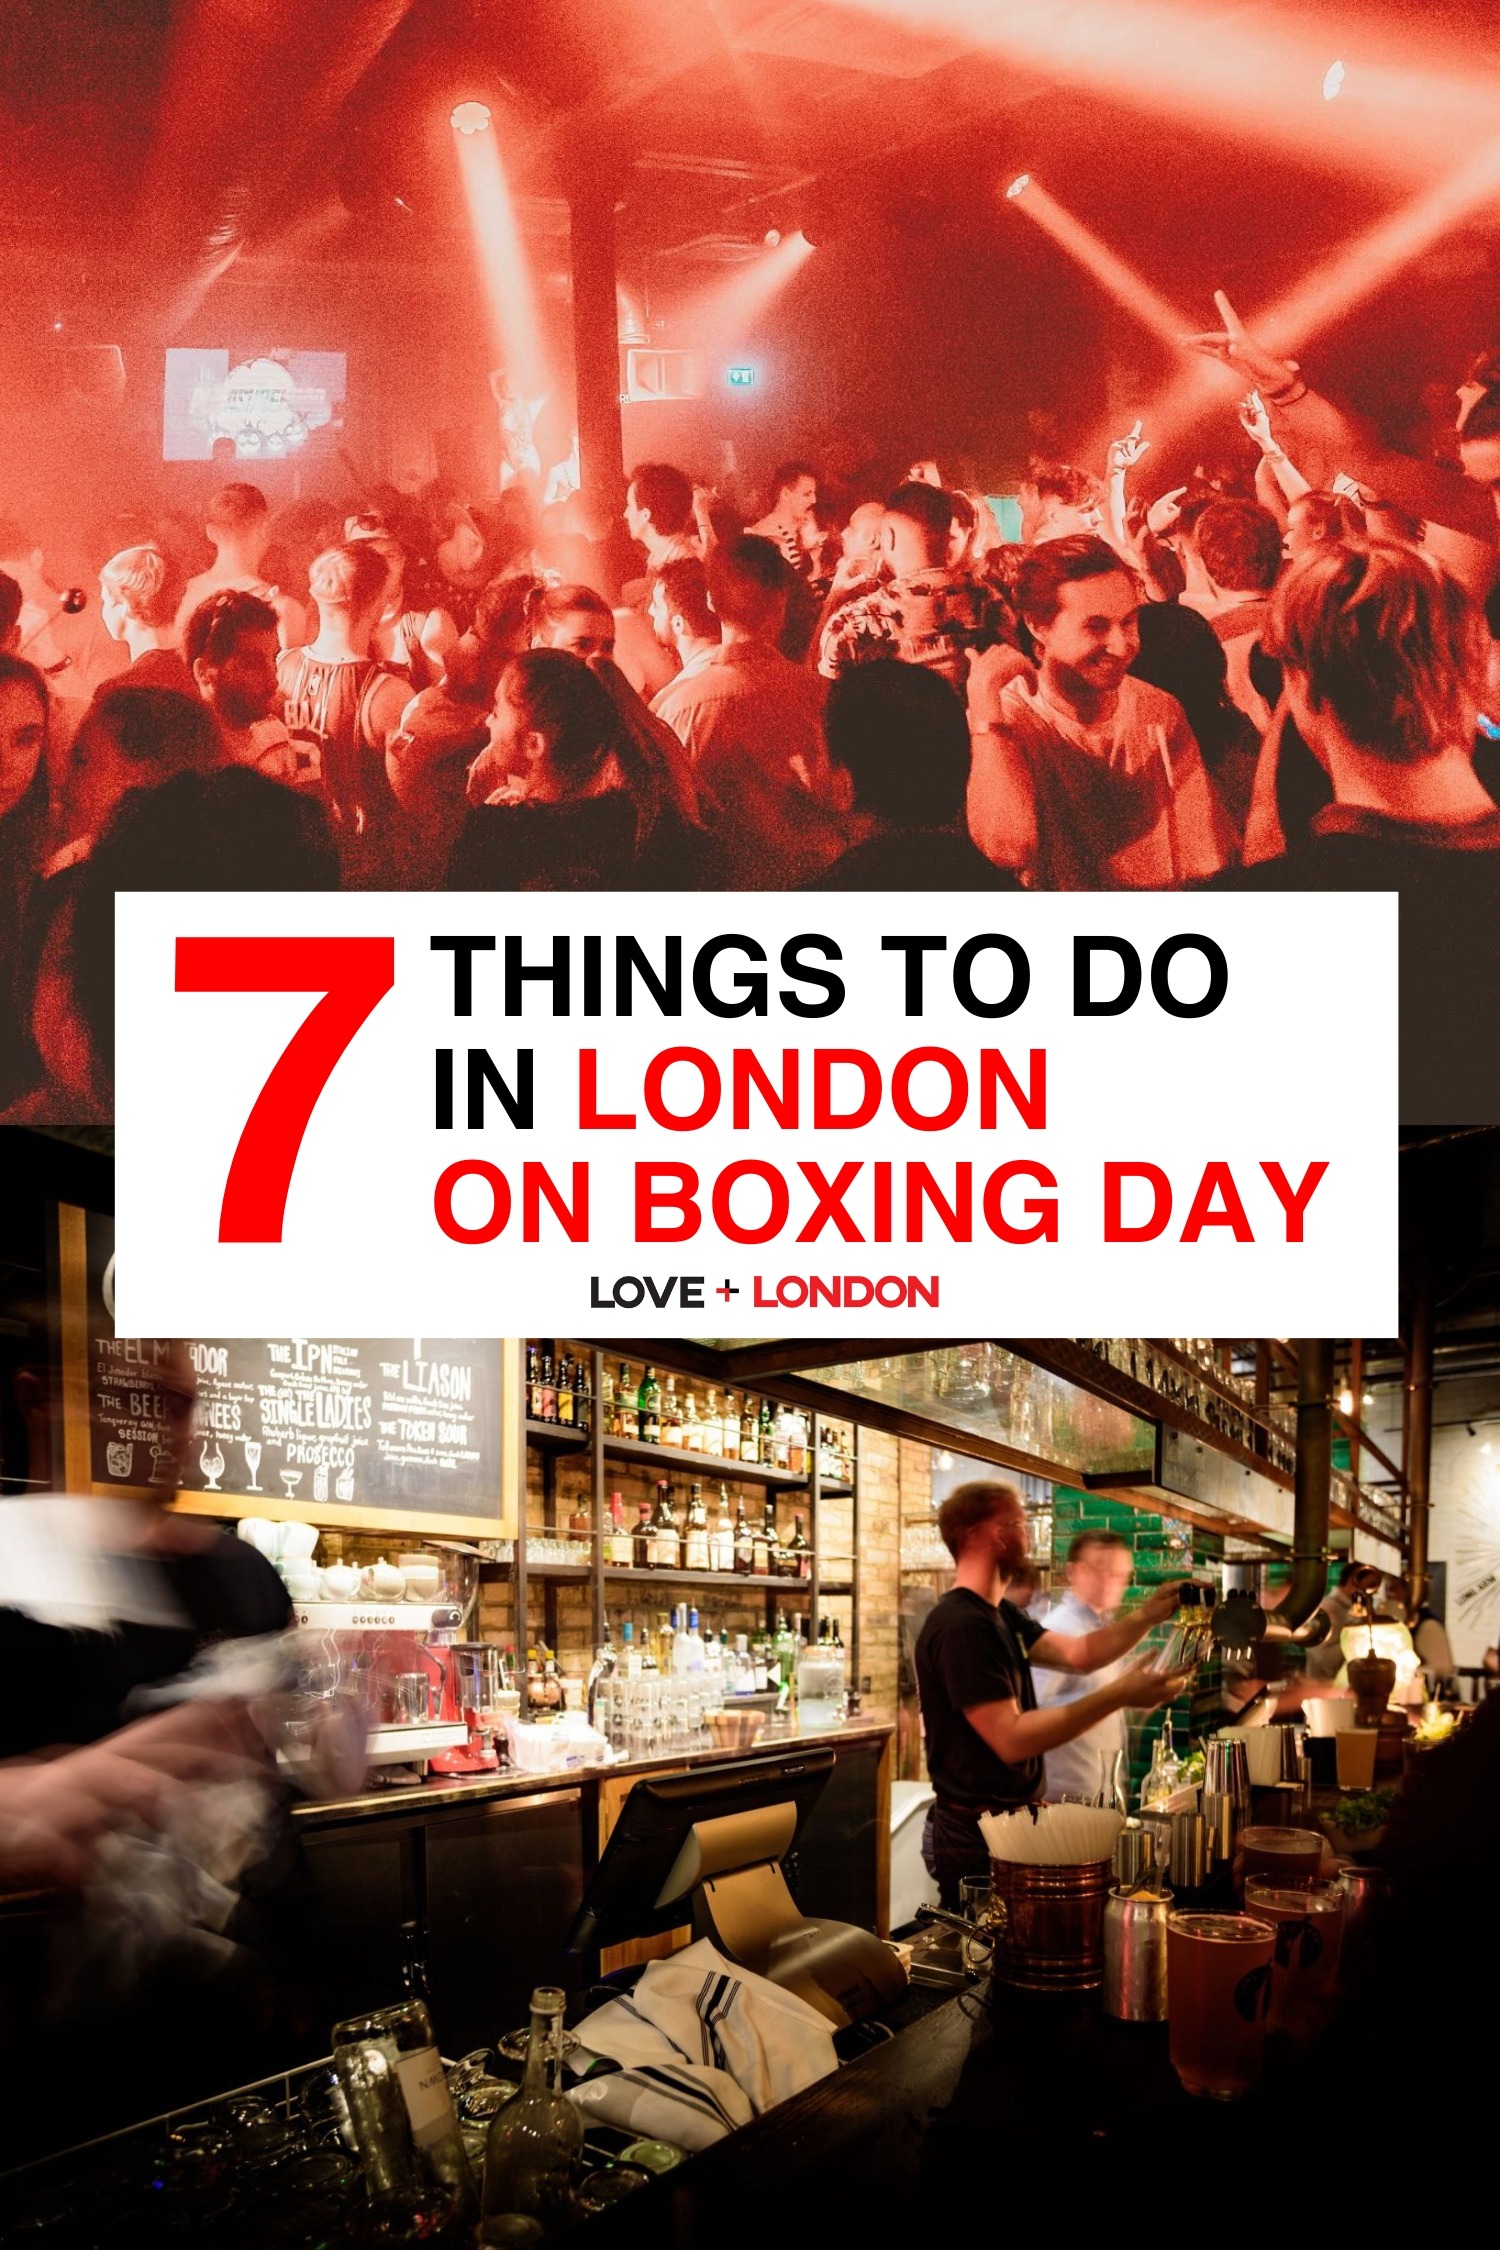 7 Things to Do in London on Boxing Day